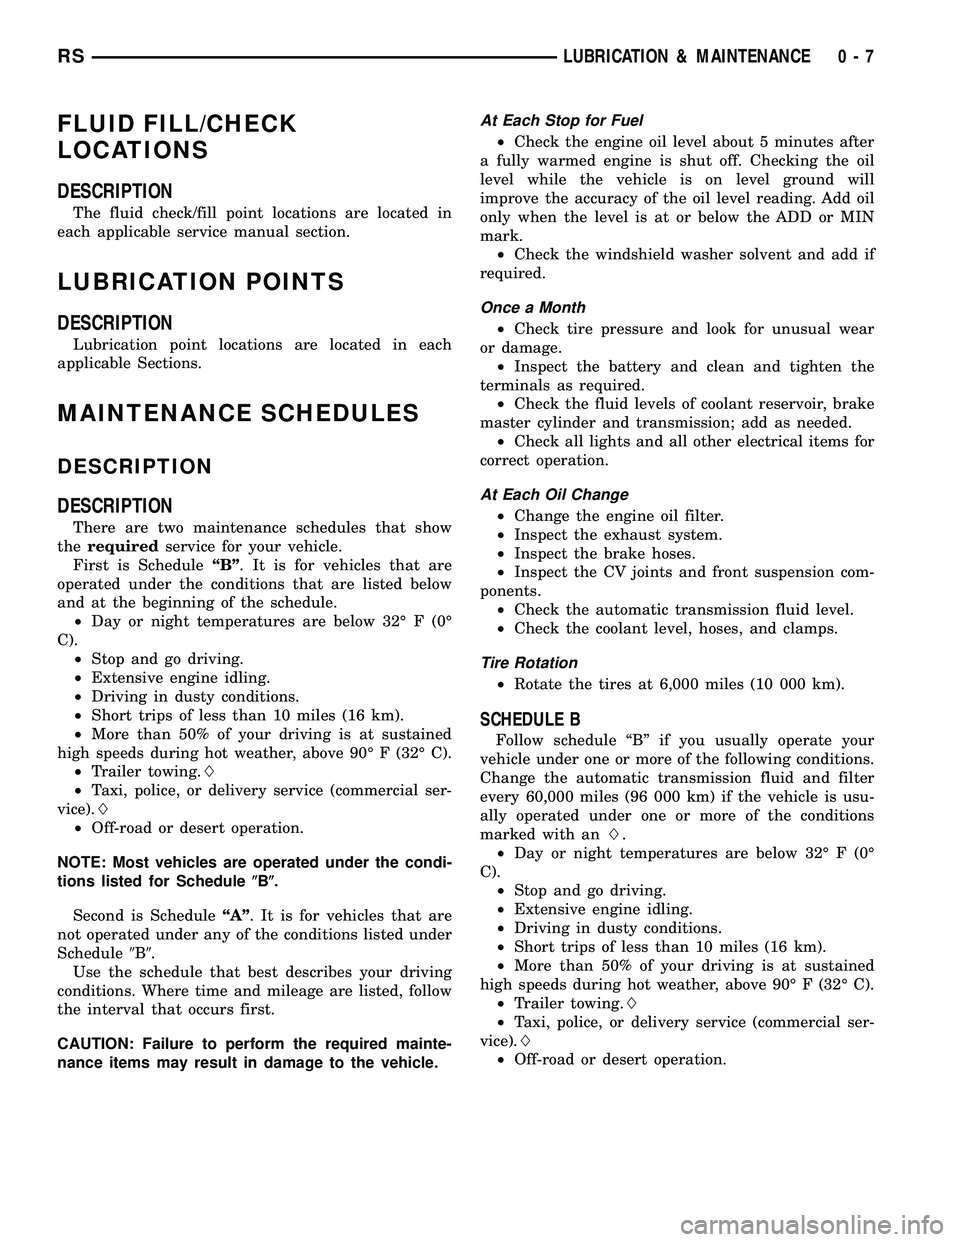 DODGE TOWN AND COUNTRY 2004 User Guide FLUID FILL/CHECK
LOCATIONS
DESCRIPTION
The fluid check/fill point locations are located in
each applicable service manual section.
LUBRICATION POINTS
DESCRIPTION
Lubrication point locations are locate